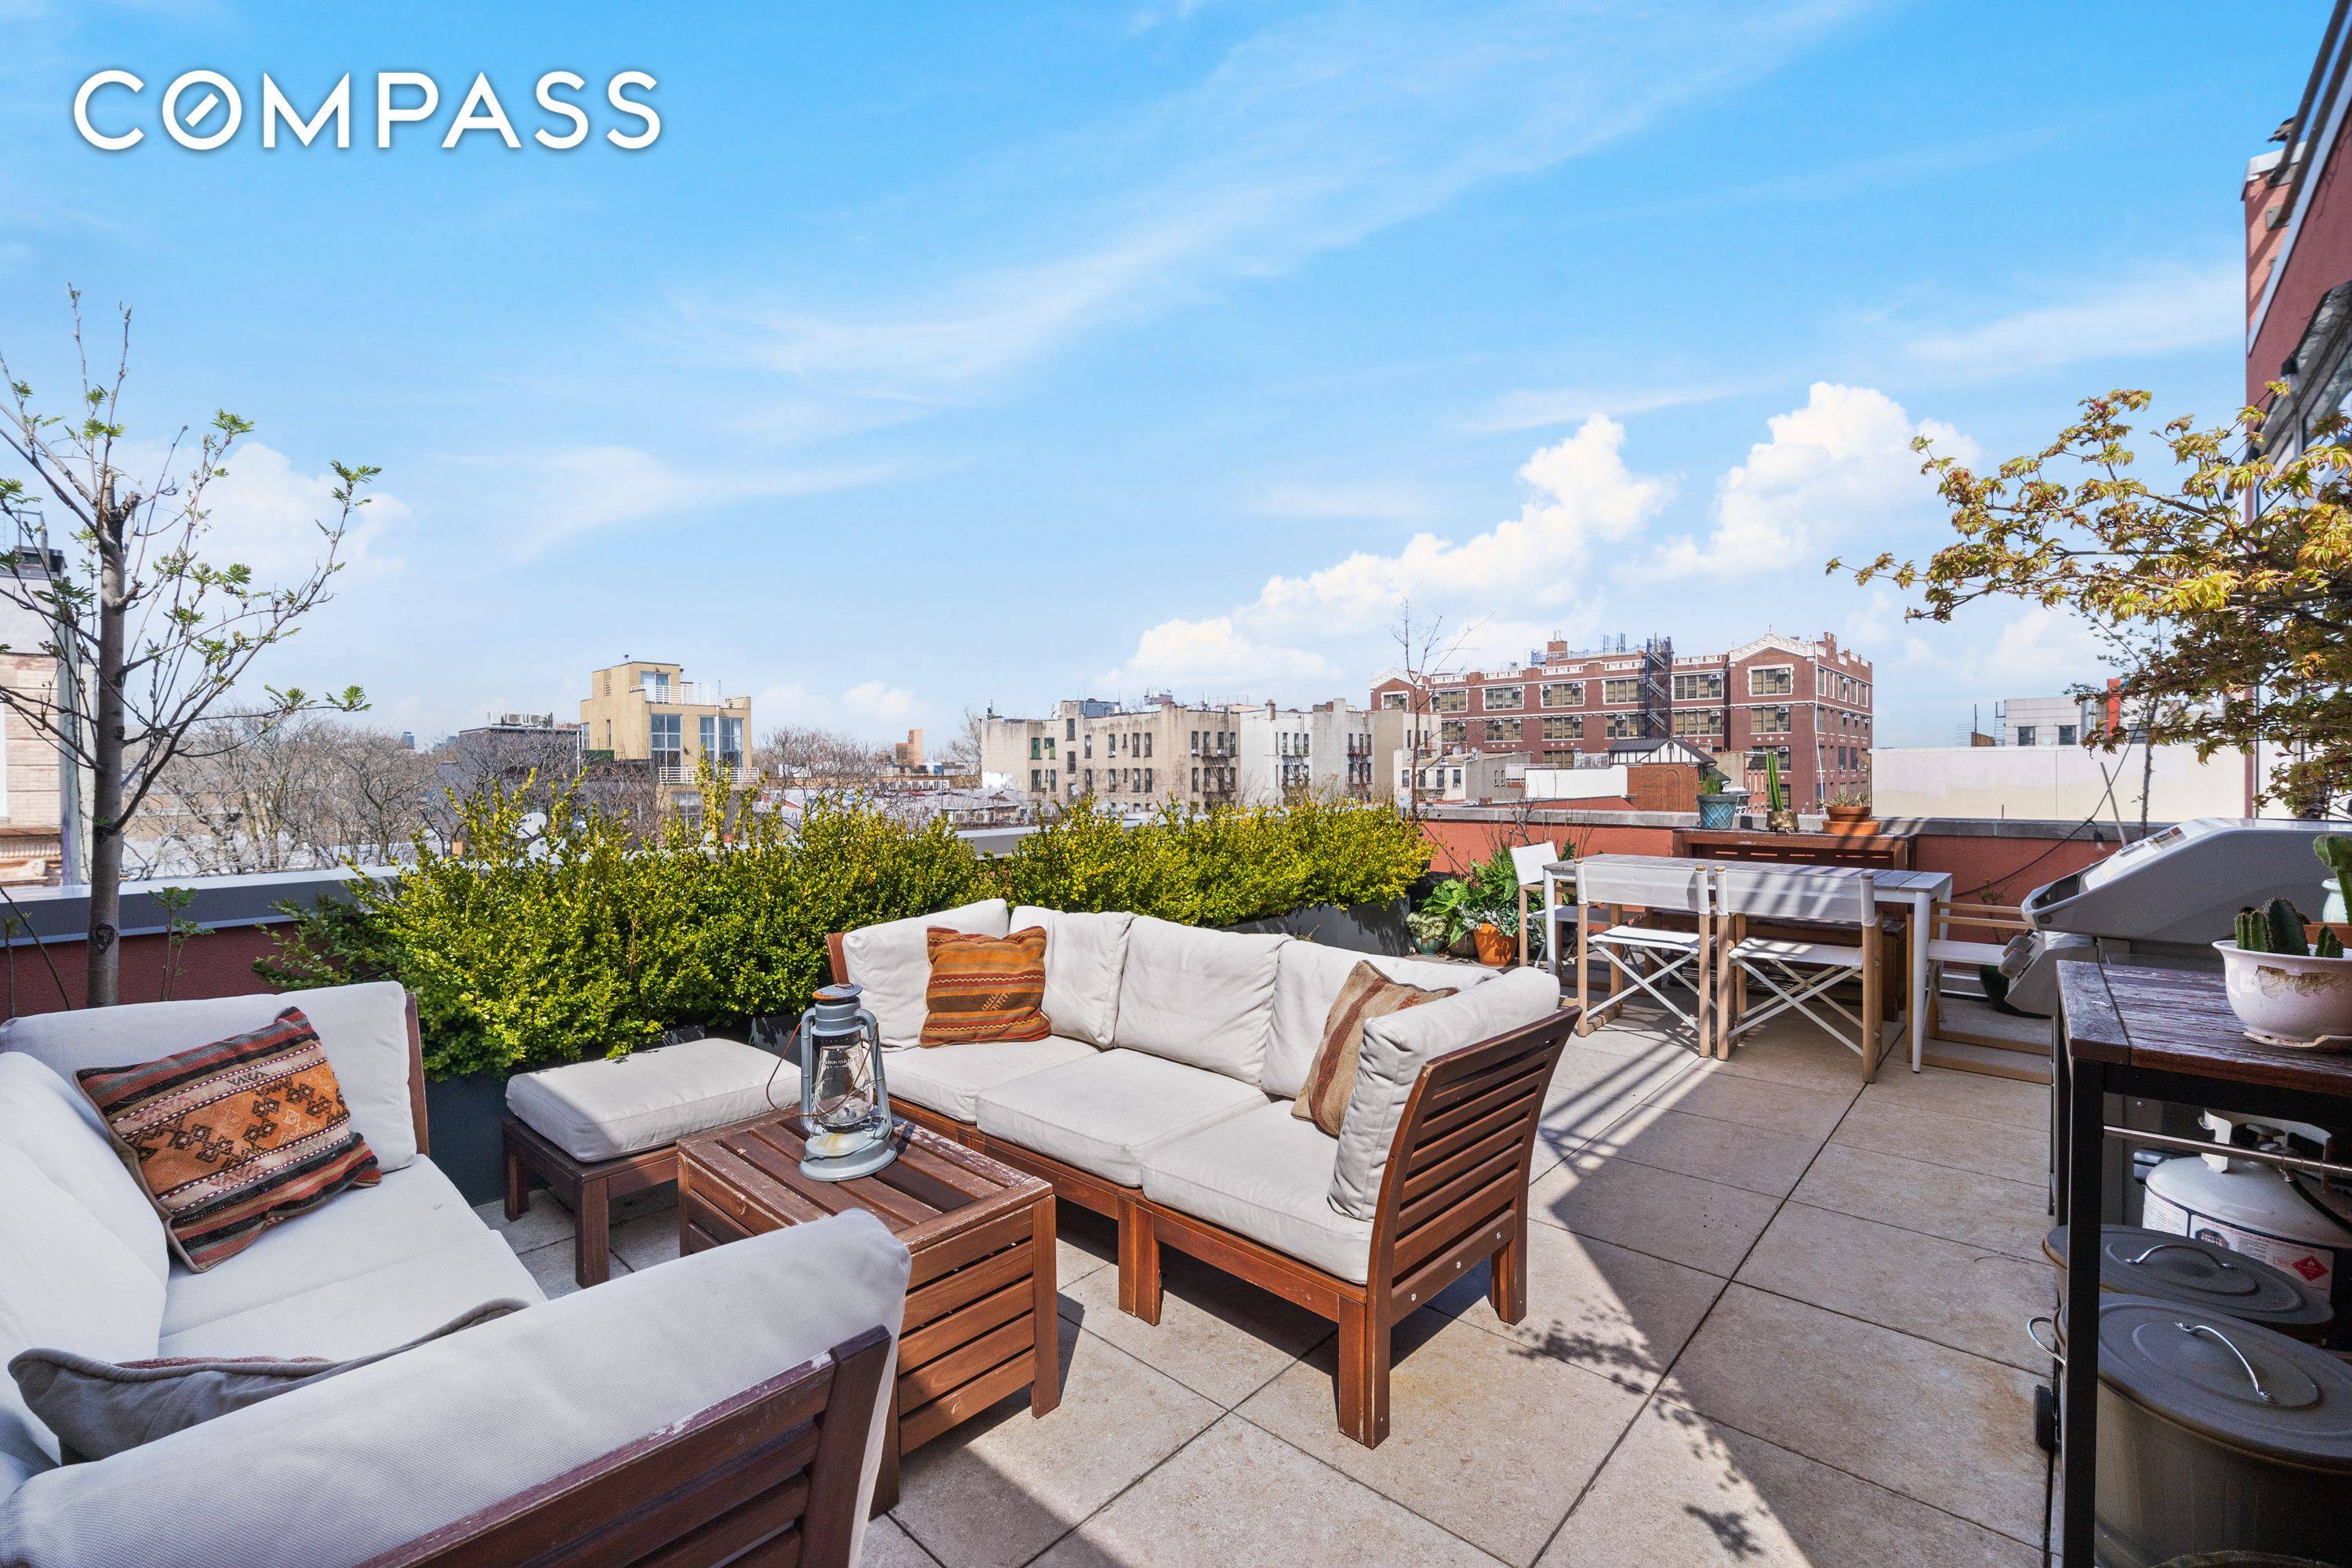 194 Meserole, 4A is an amazing opportunity to own a fabulous apartment with massive outdoor space in one of the best neighborhoods in NYC !